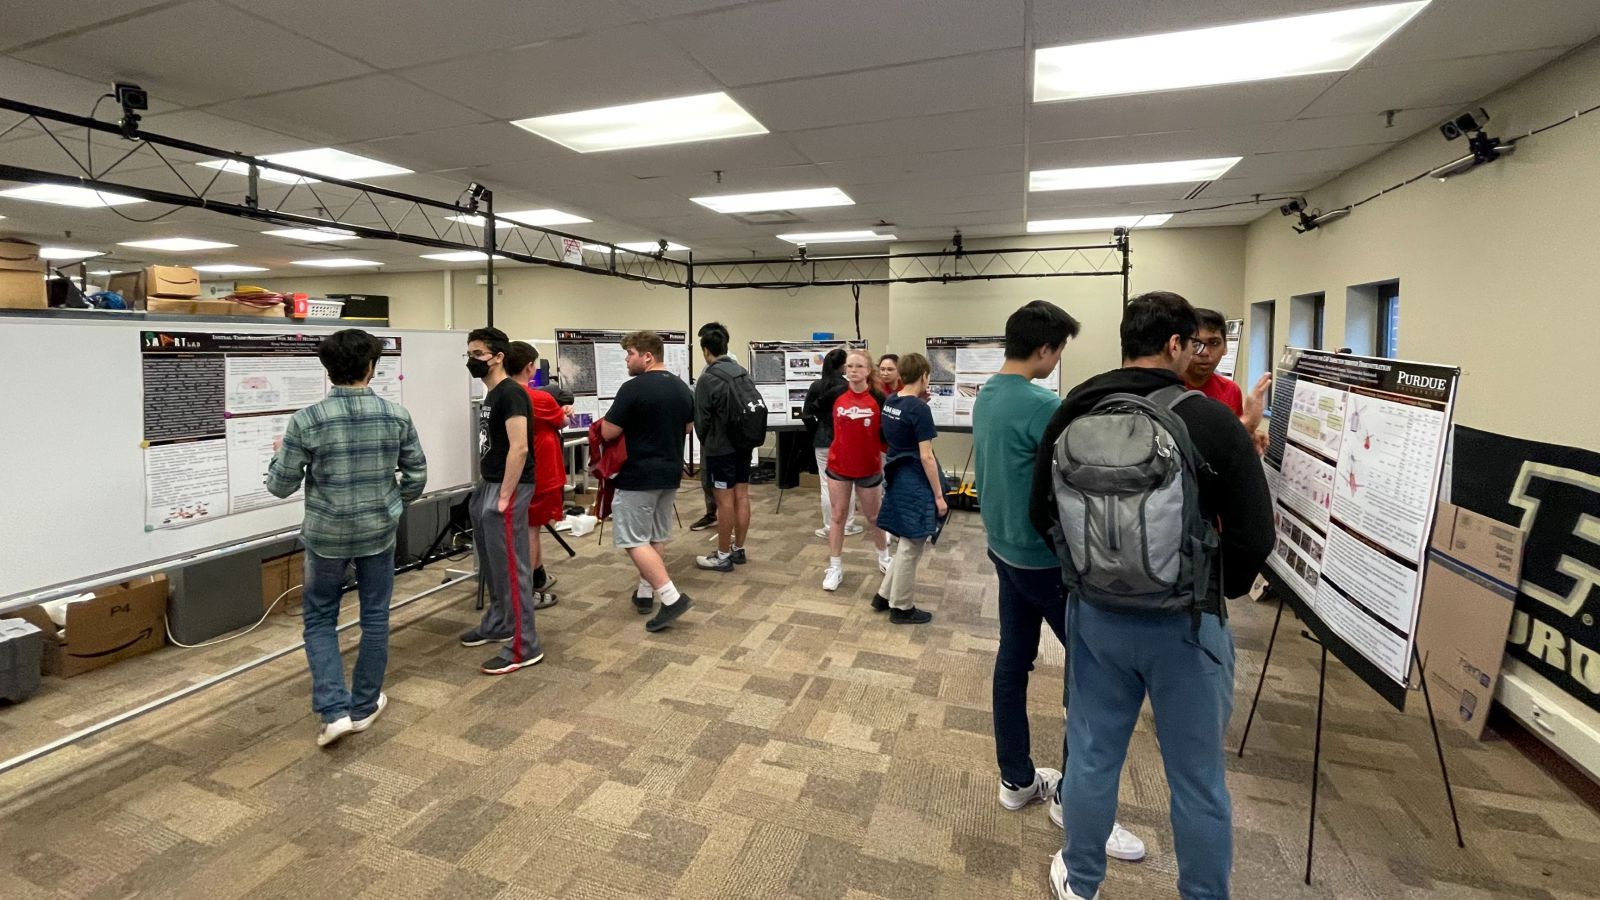 WLHS students had the opportunity to receive mentorship from SMART Lab researchers and faculty, particularly on the final day hosted on the Purdue campus itself. (Photo provided by event programmers)